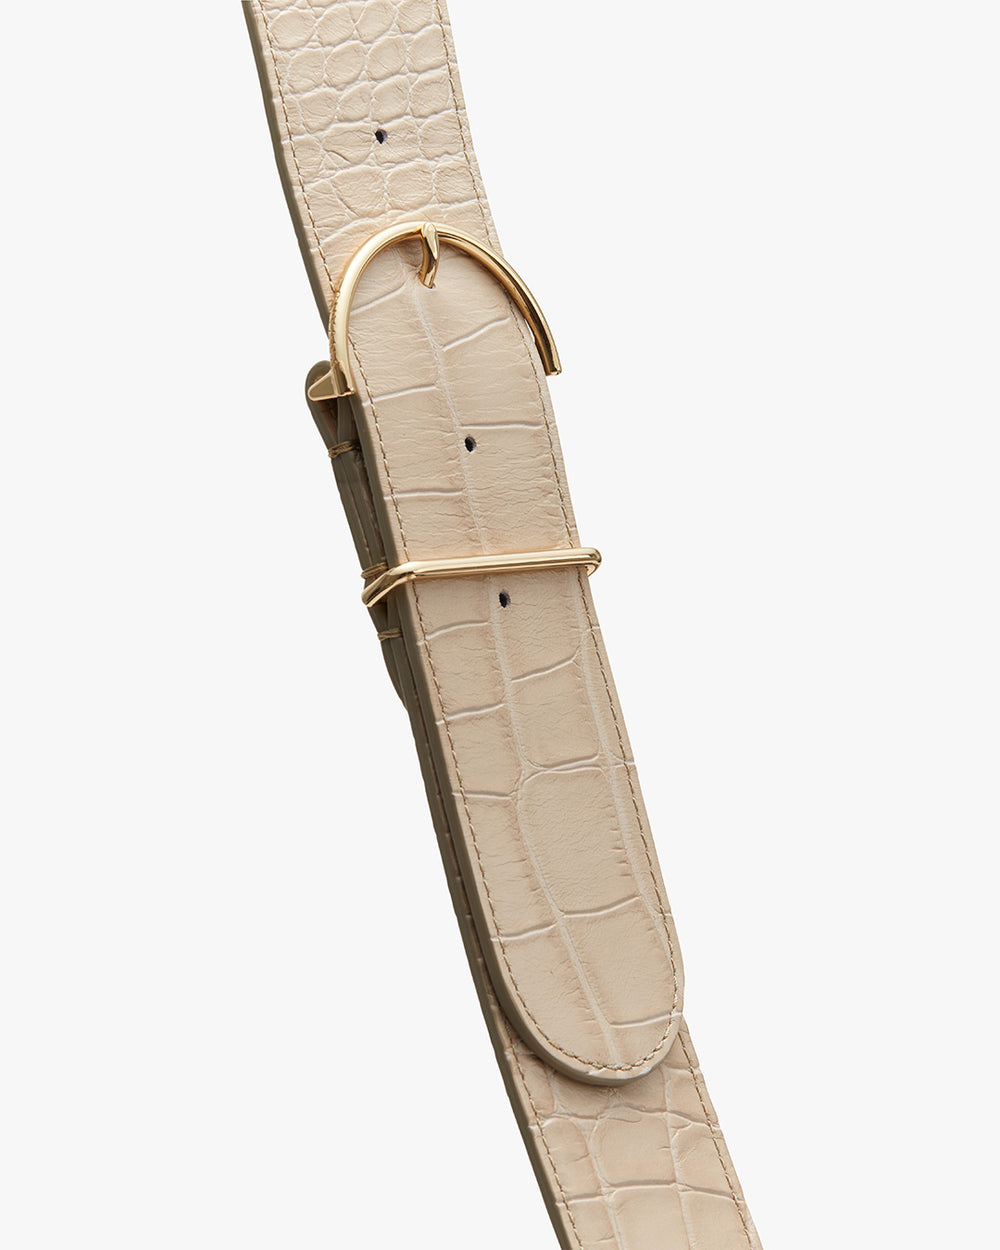 Close-up of a textured watch strap with a metal buckle.